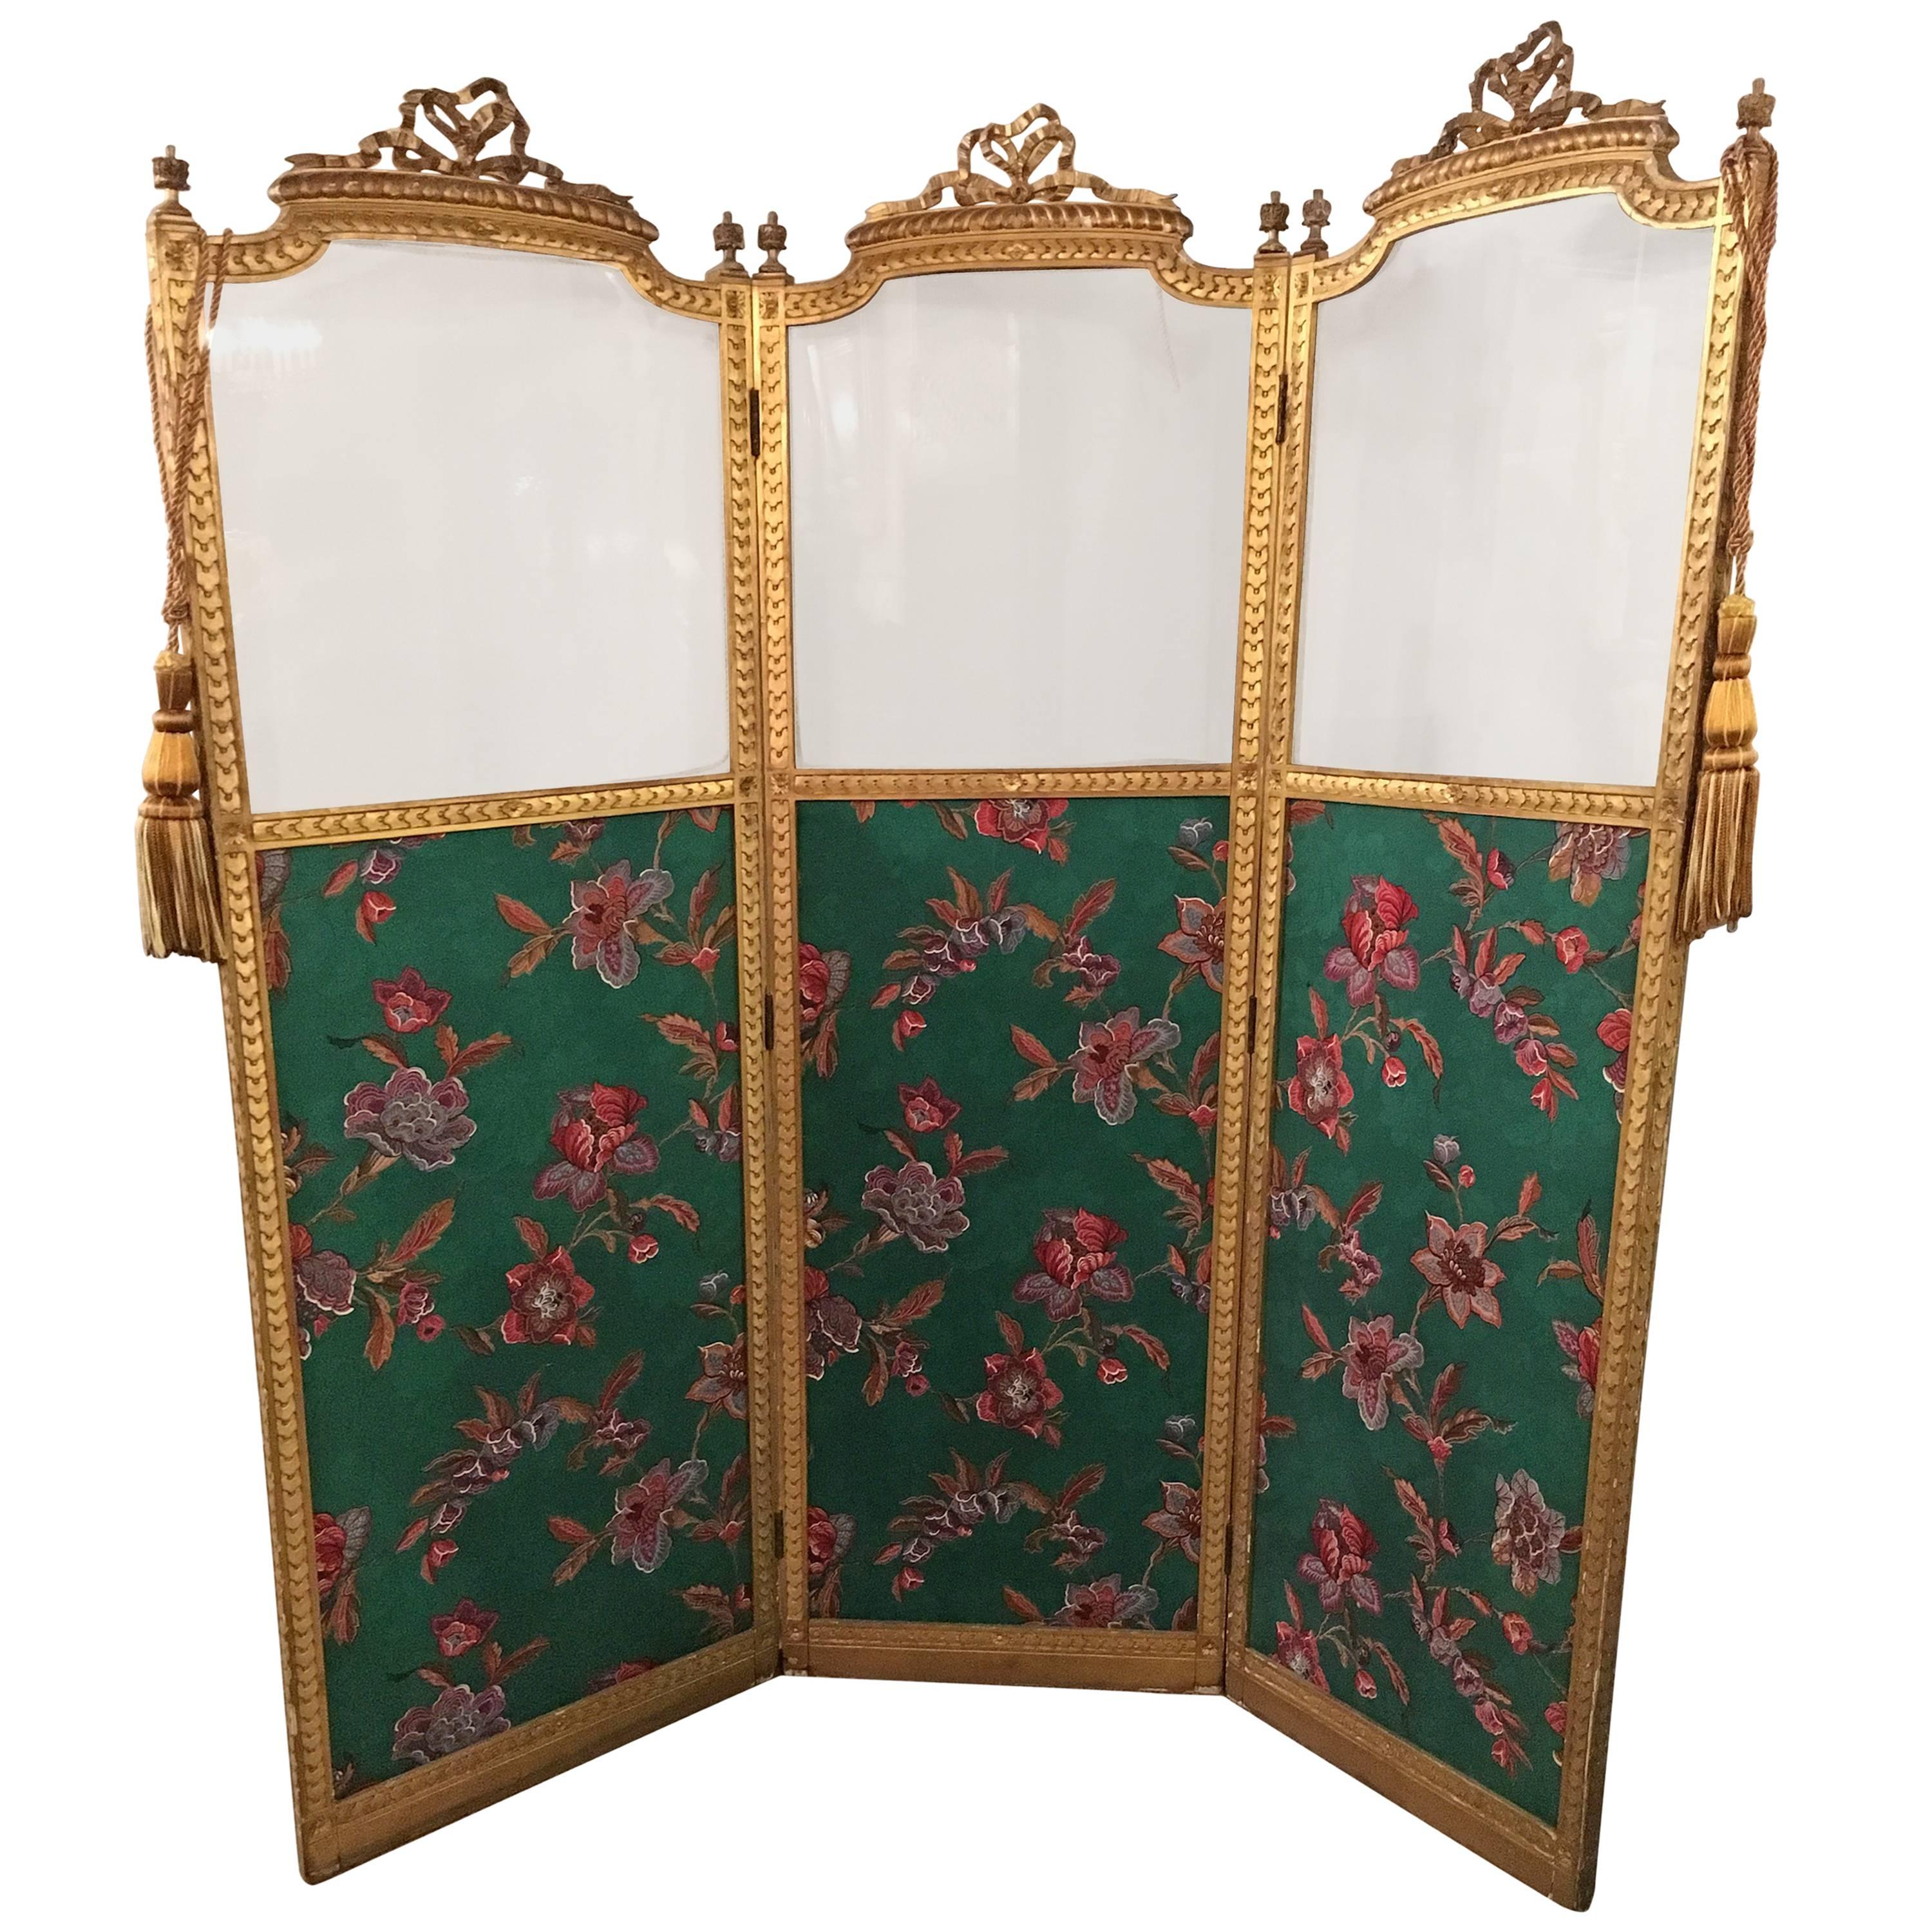 Antique Three-Panel French Screen or Room Divider